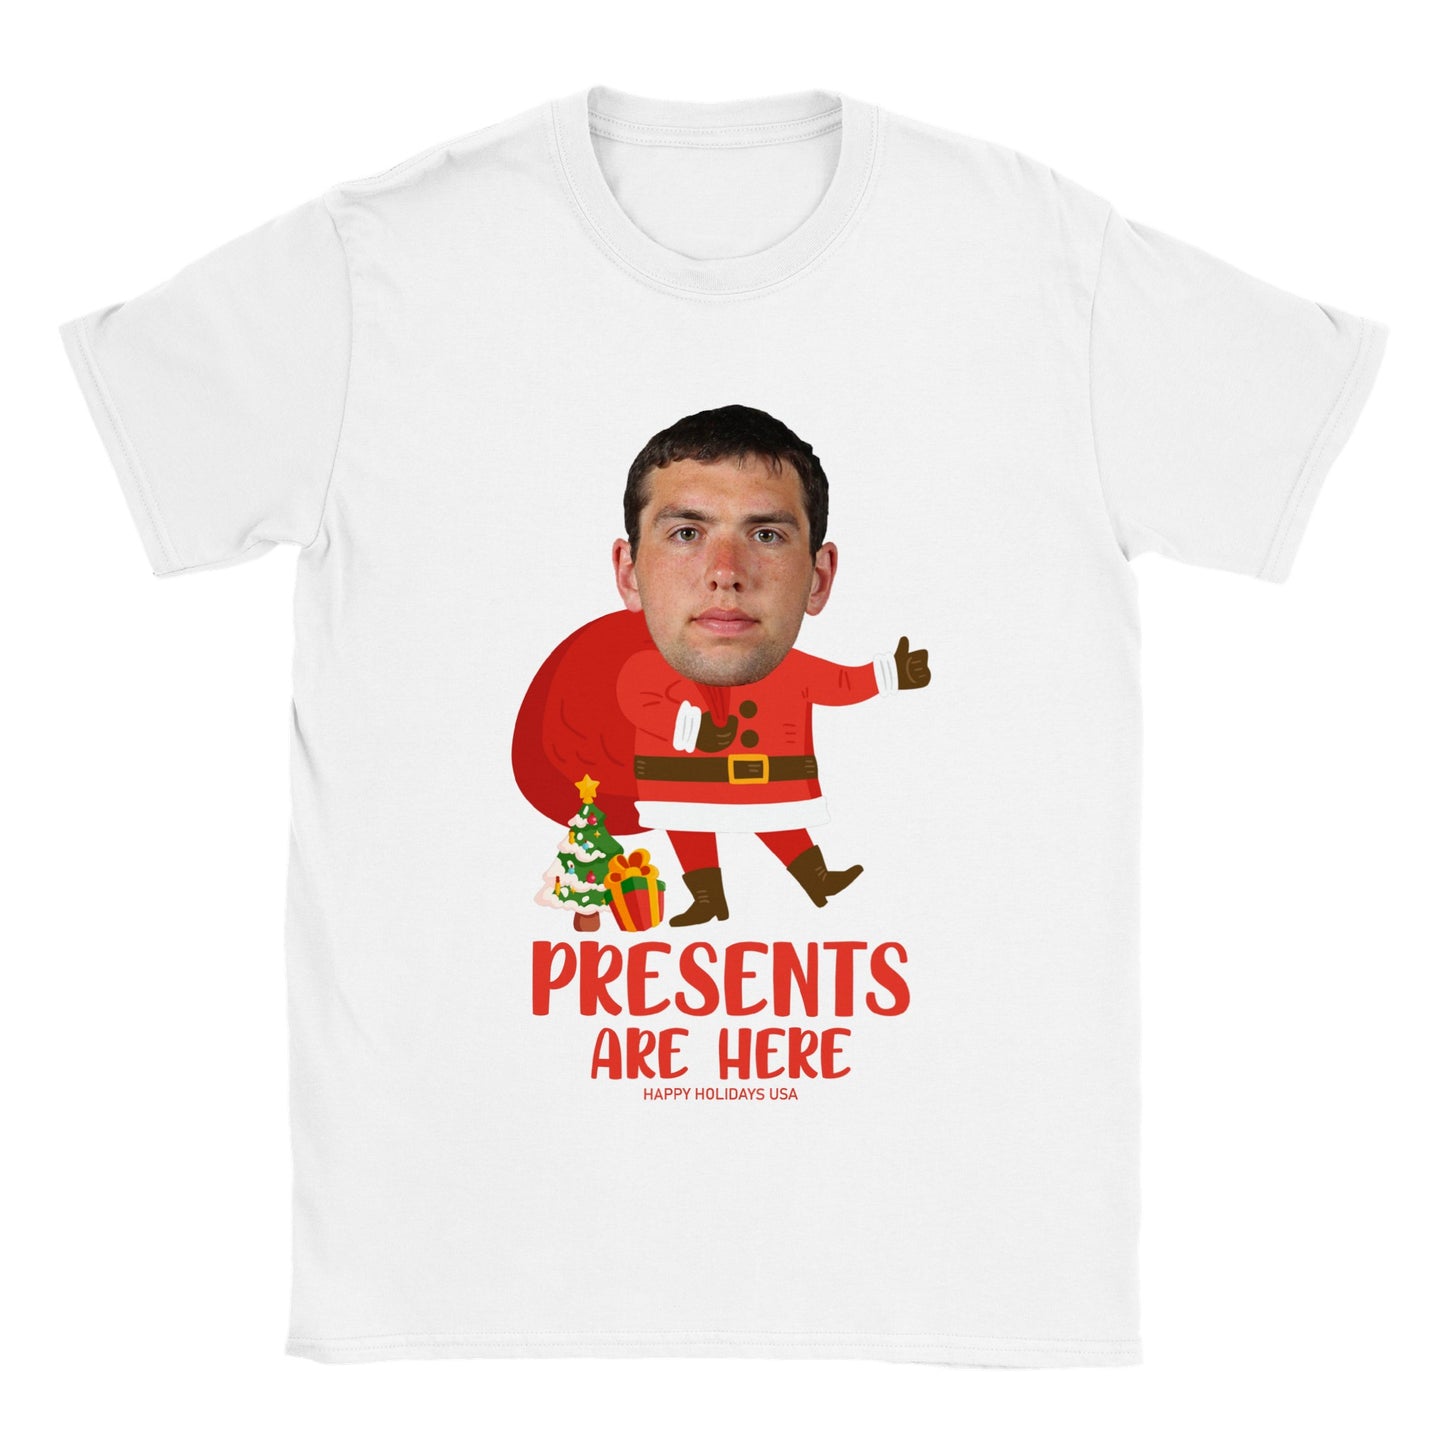 Presents Are Here - Christmas Tee